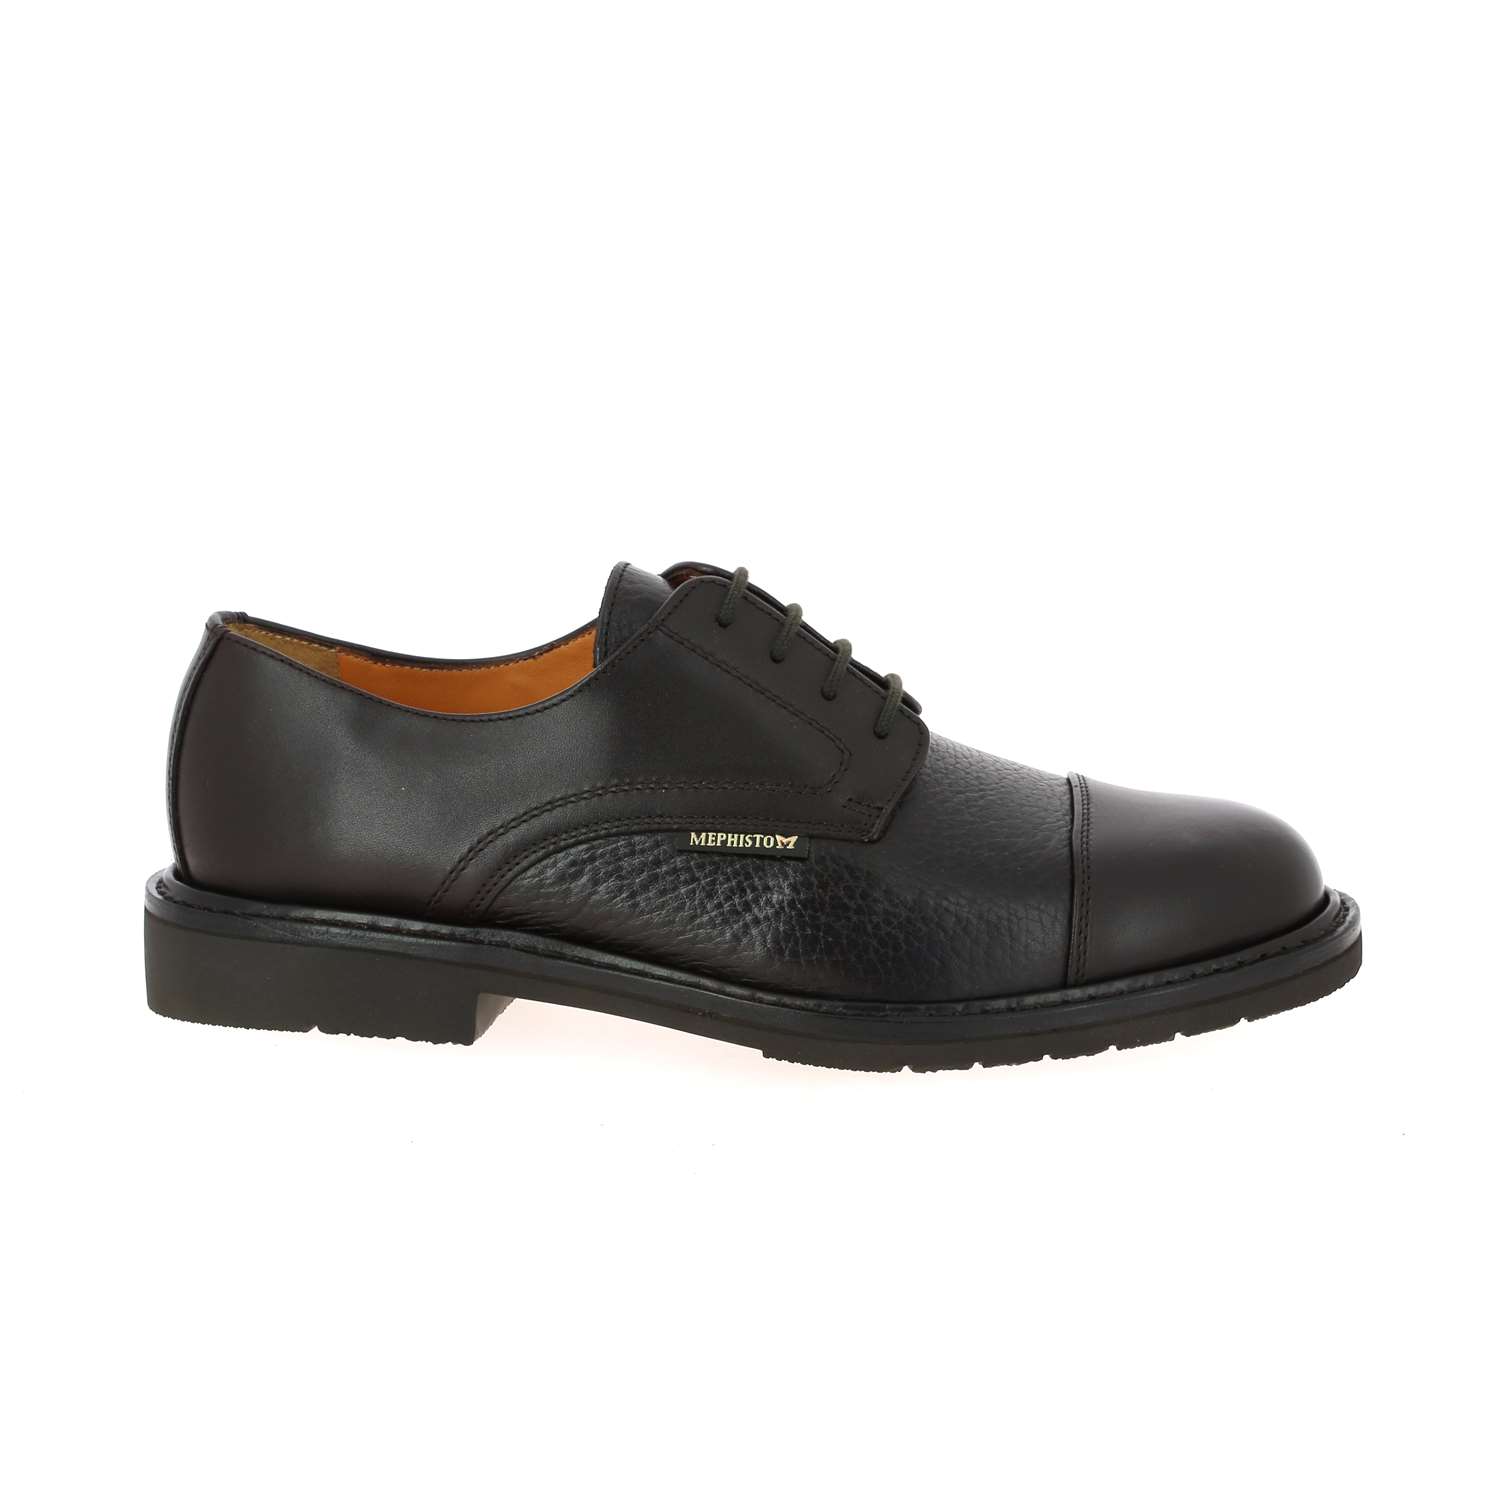 02 - MELCHIOR - MEPHISTO - Chaussures à lacets - Cuir